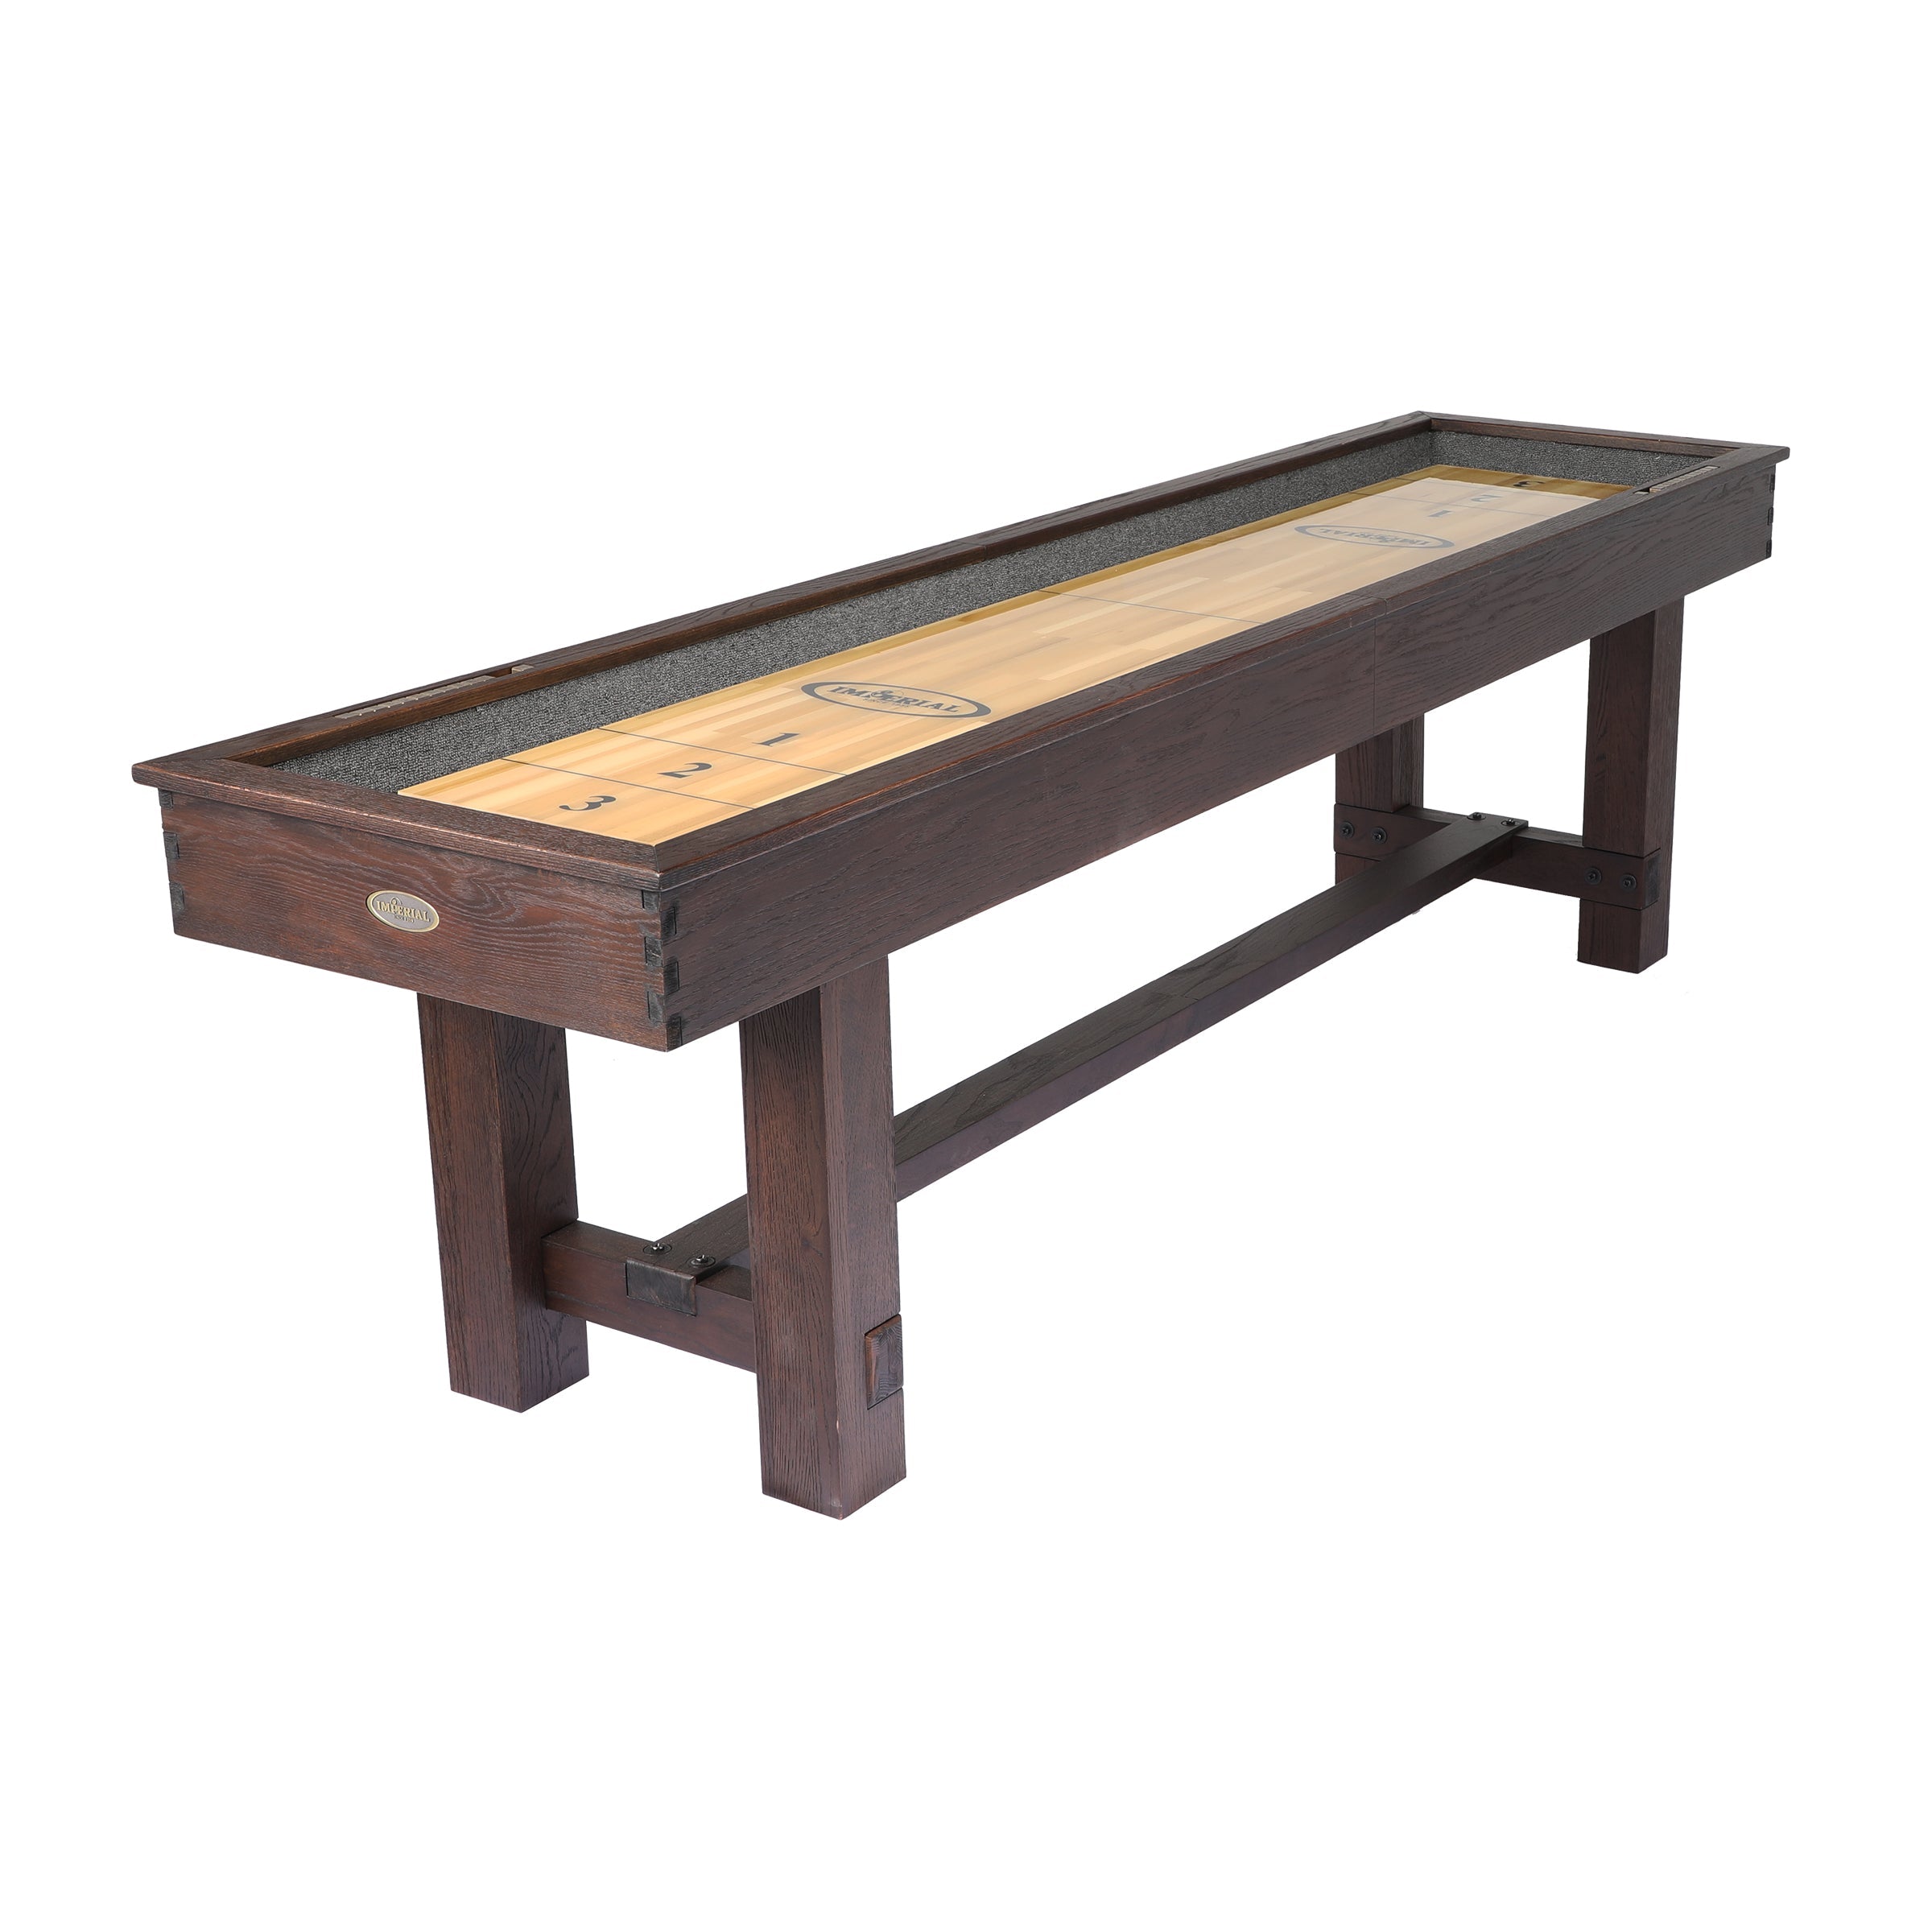 Imperial 9 ft Reno Weathered Dark Chestnut Shuffleboard Table (0026-279)